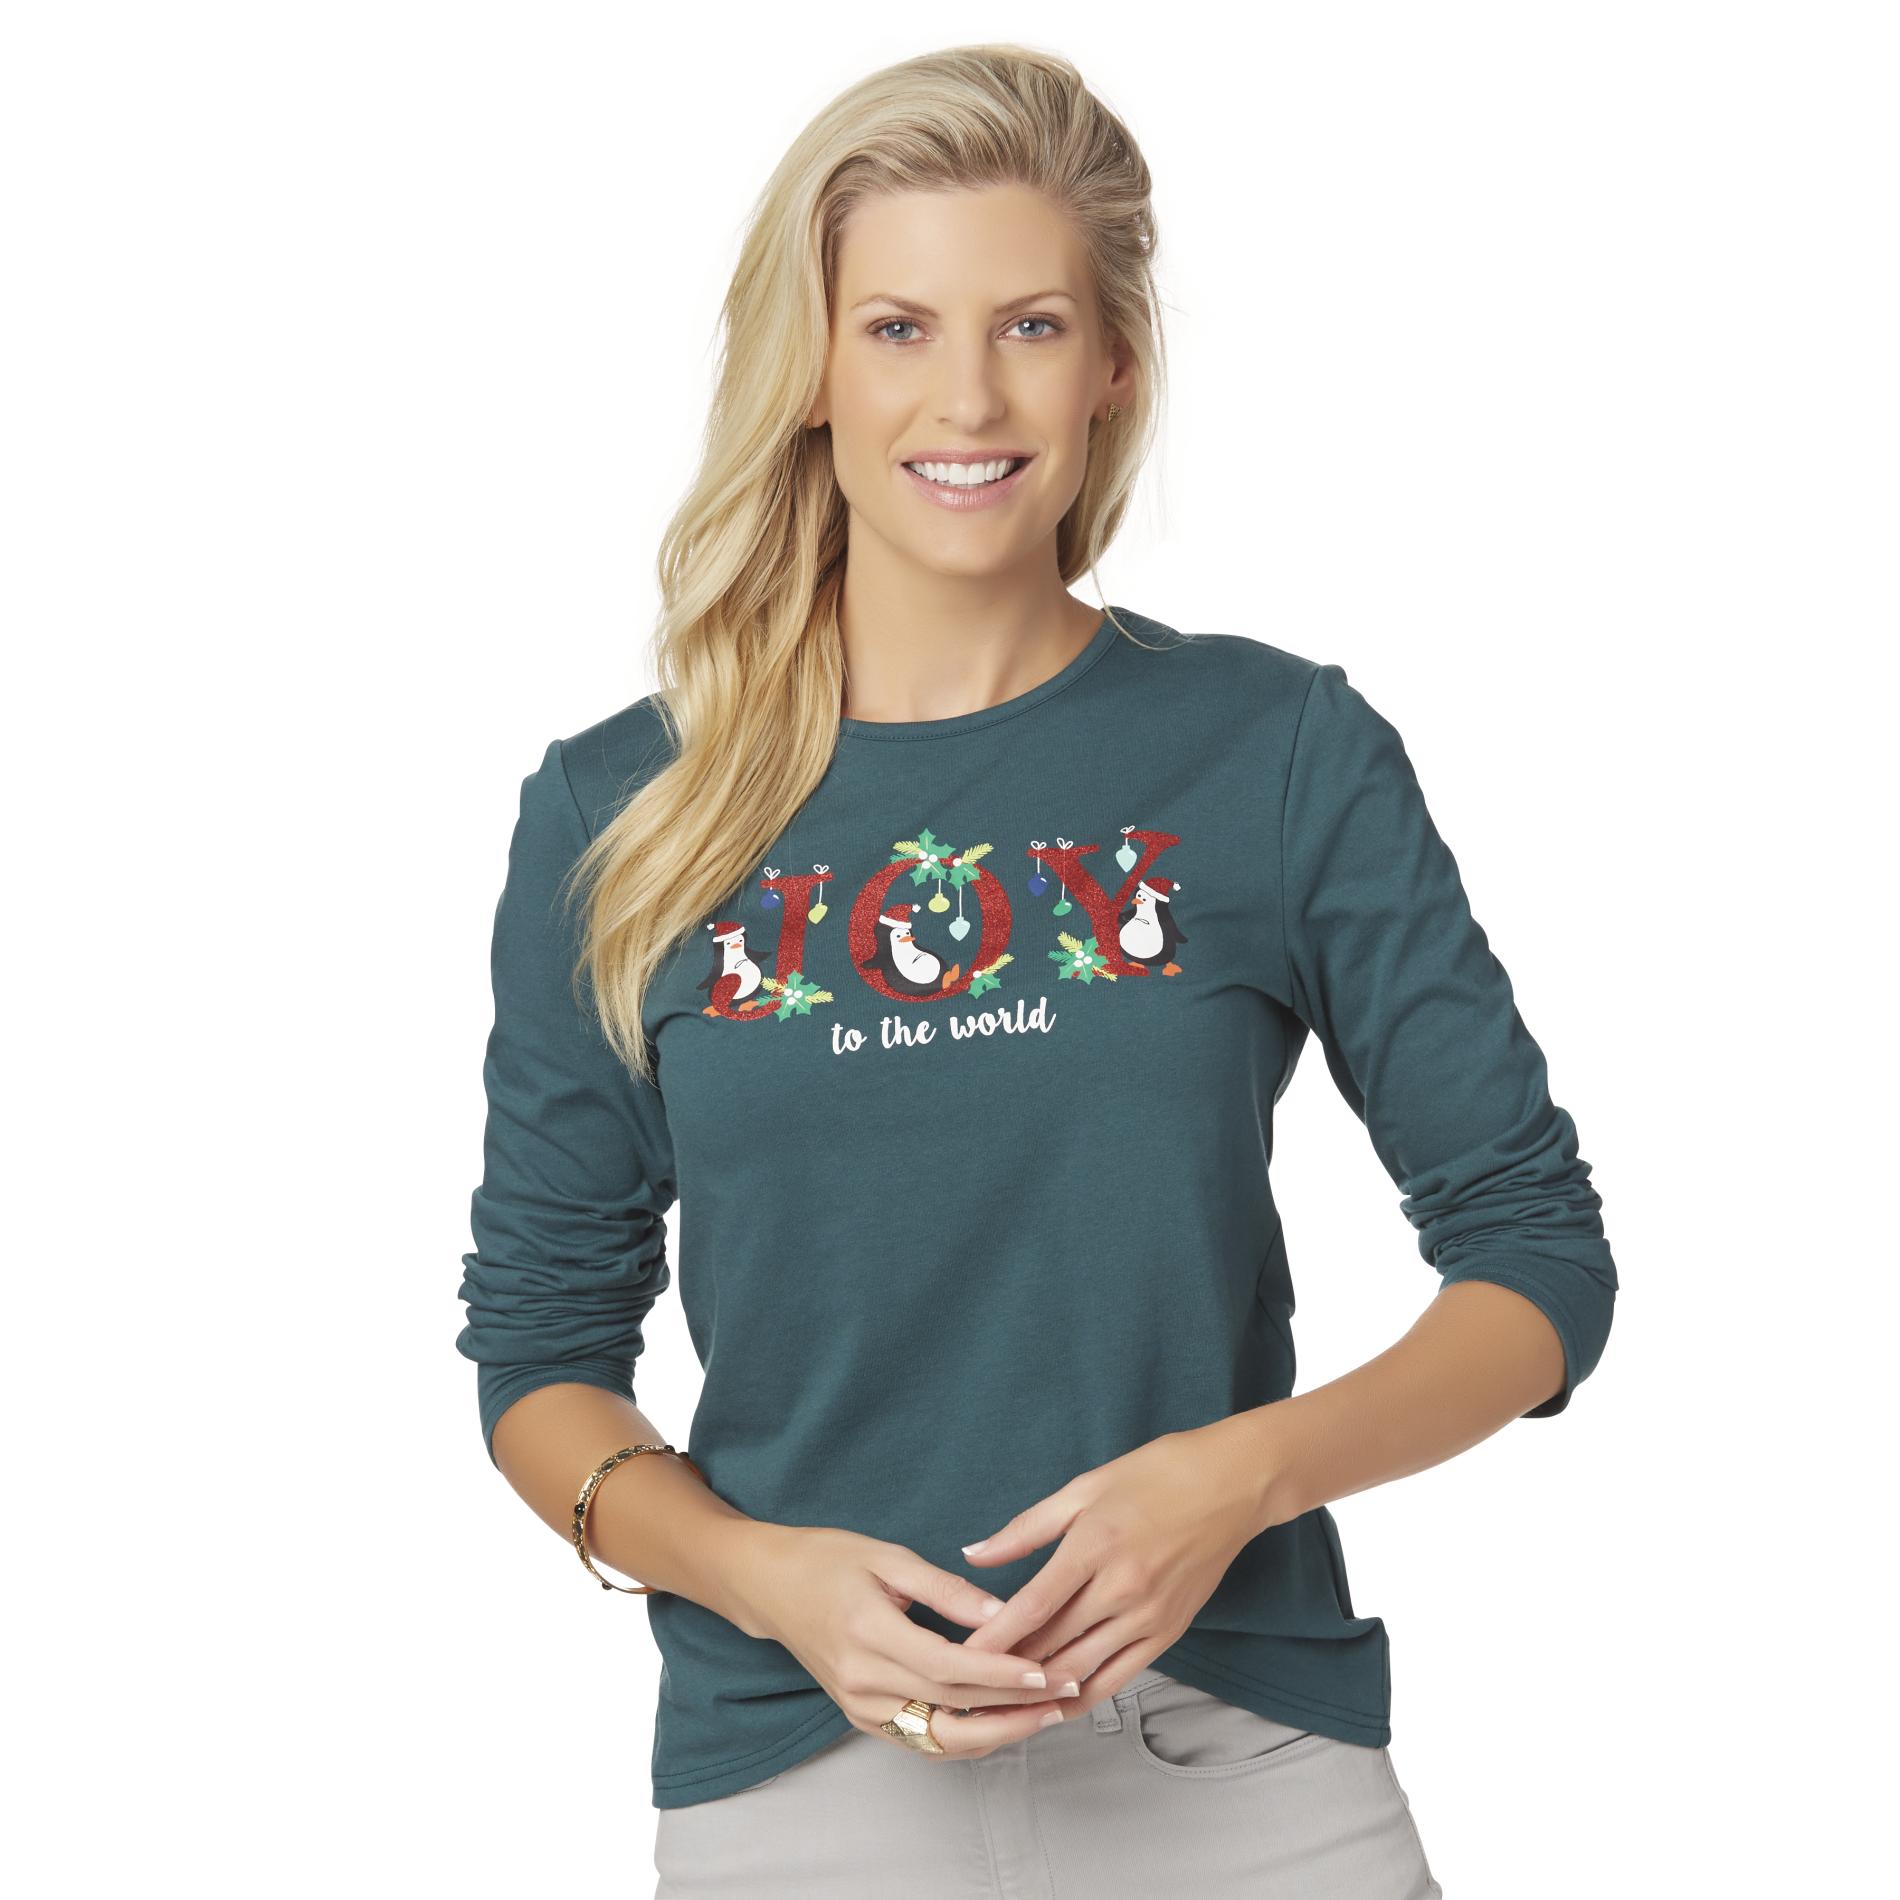 Holiday Editions Women's Long-Sleeve Christmas T-Shirt - Joy to the World